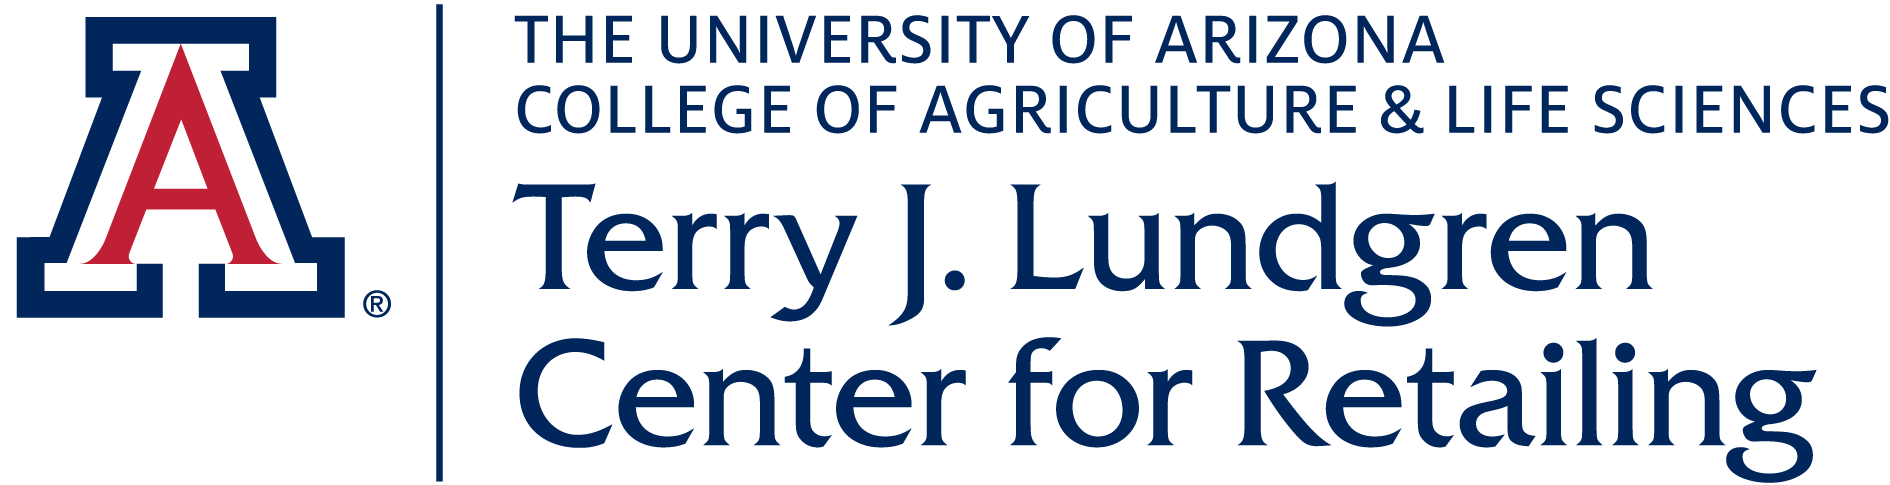 Terry J. Lundgren Center for Retailing - University of Arizona College of Agriculture and Life Sciences